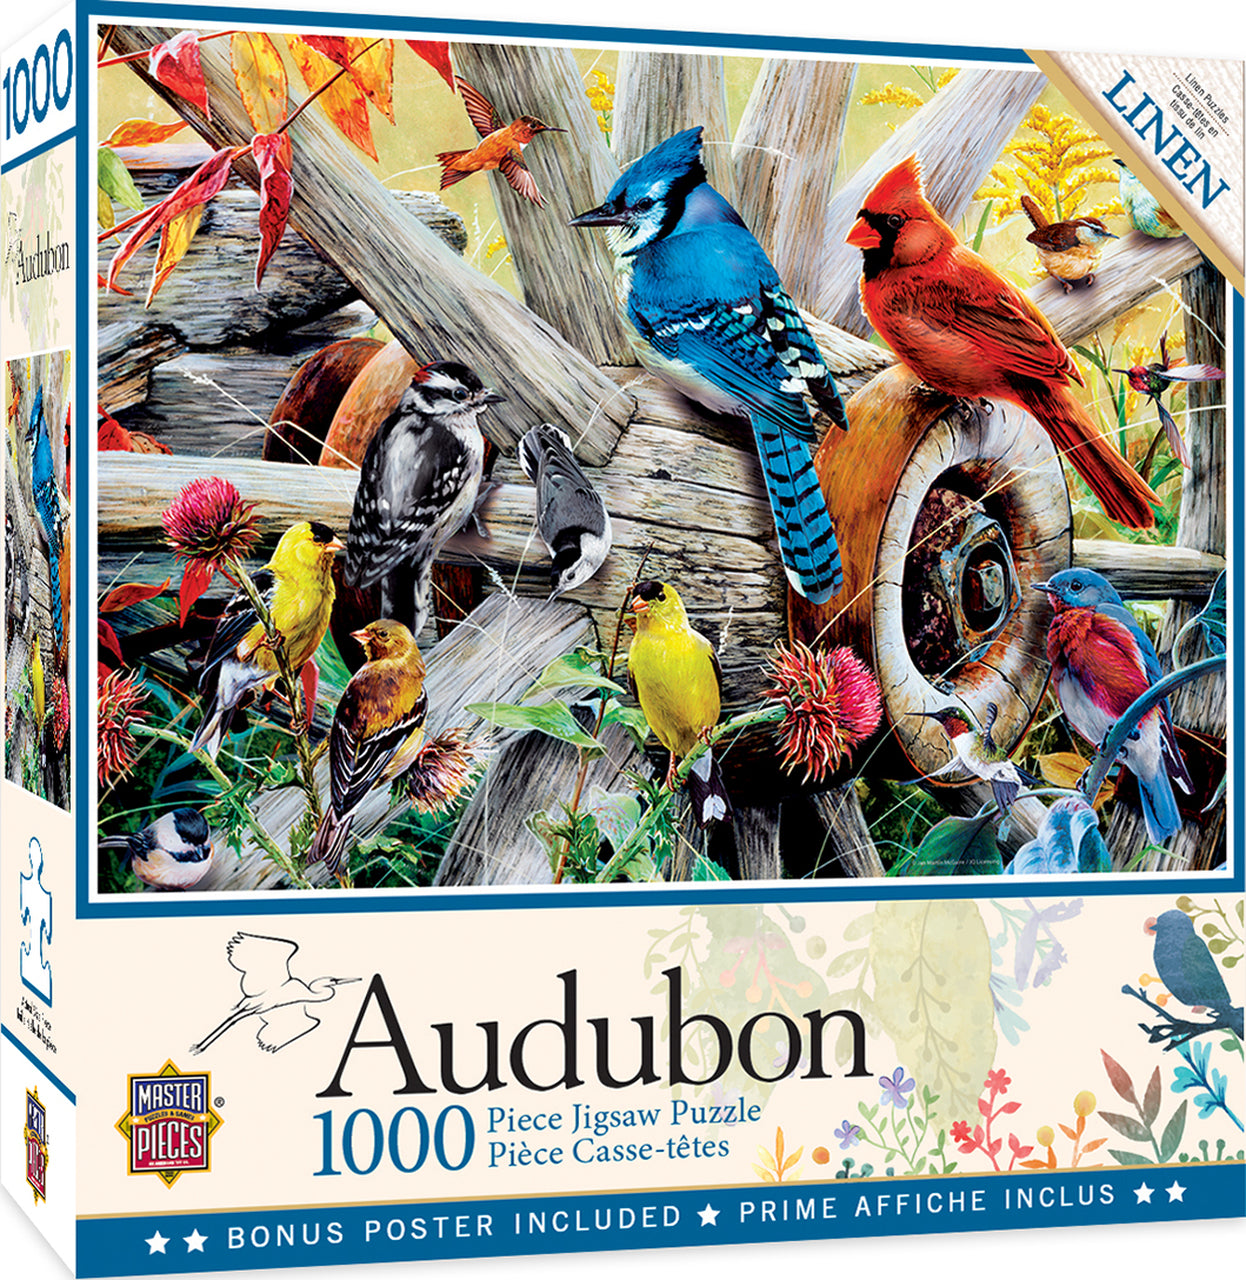 A puzzle box filled with birds and animals, sponsored by National Audubon Society, with 1000 pieces and measuring 19.25" x 26.75".